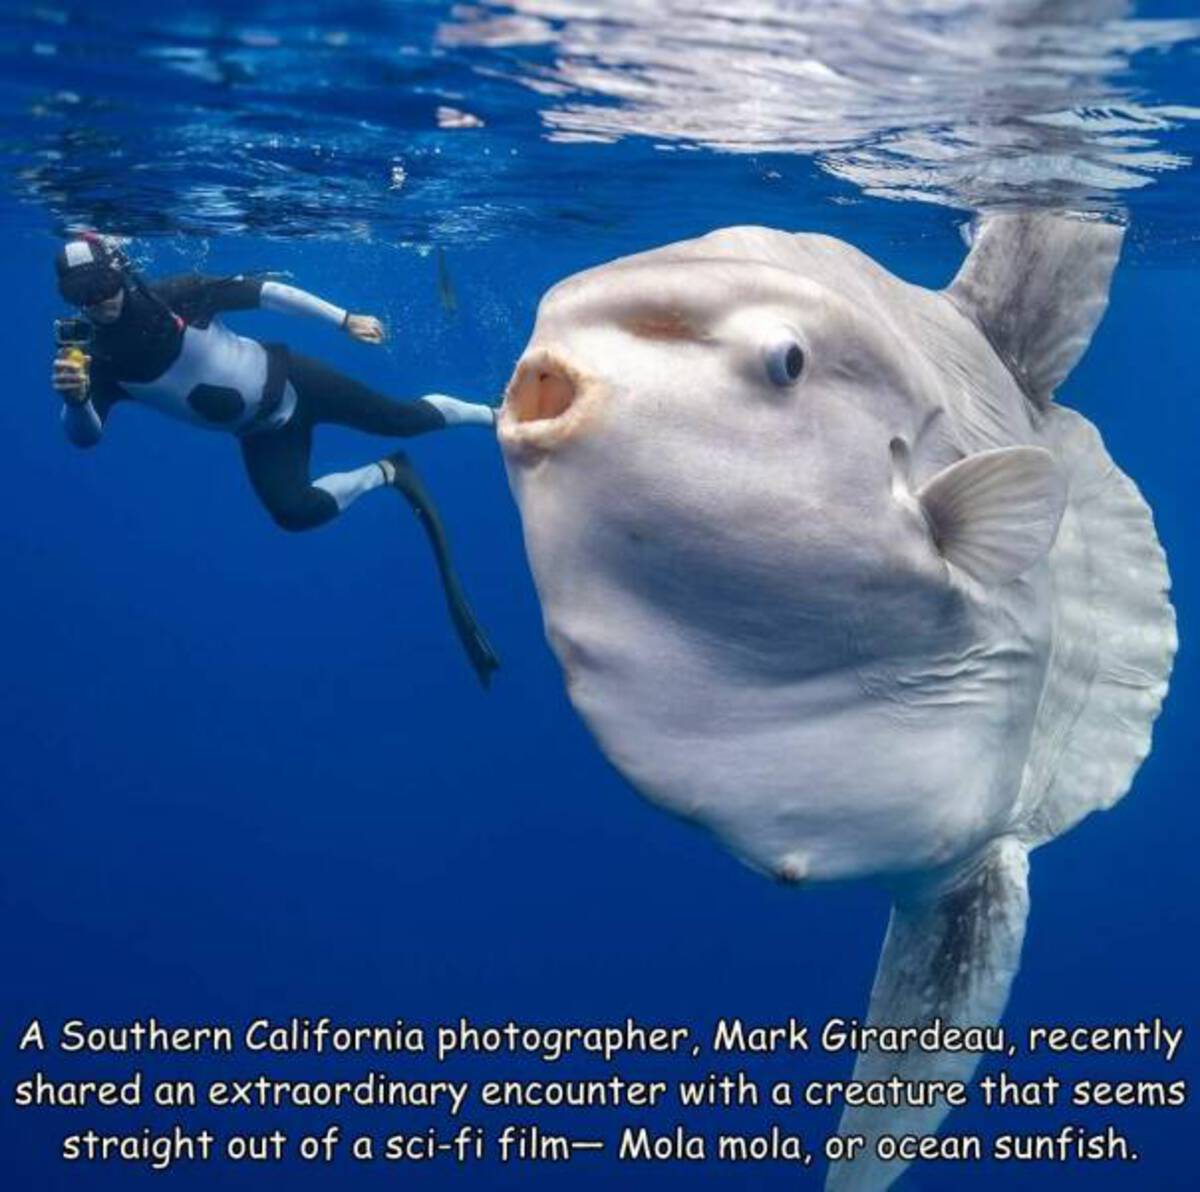 water - A Southern California photographer, Mark Girardeau, recently d an extraordinary encounter with a creature that seems straight out of a scifi film Mola mola, or ocean sunfish.